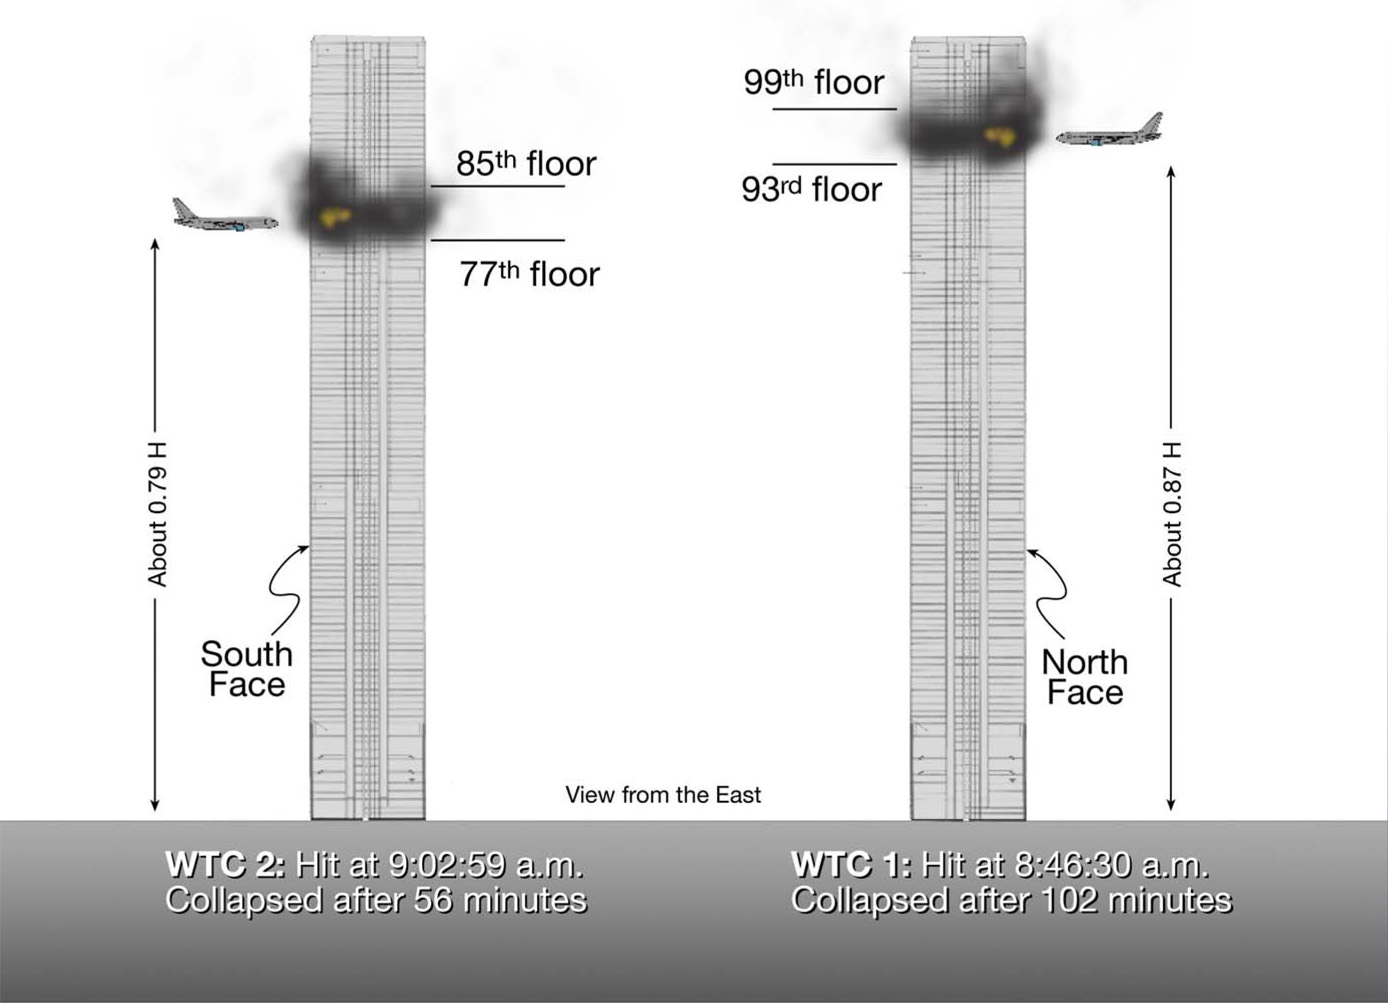 FileWorld Trade Center 911 Attacks Illustration with Vertical Impact